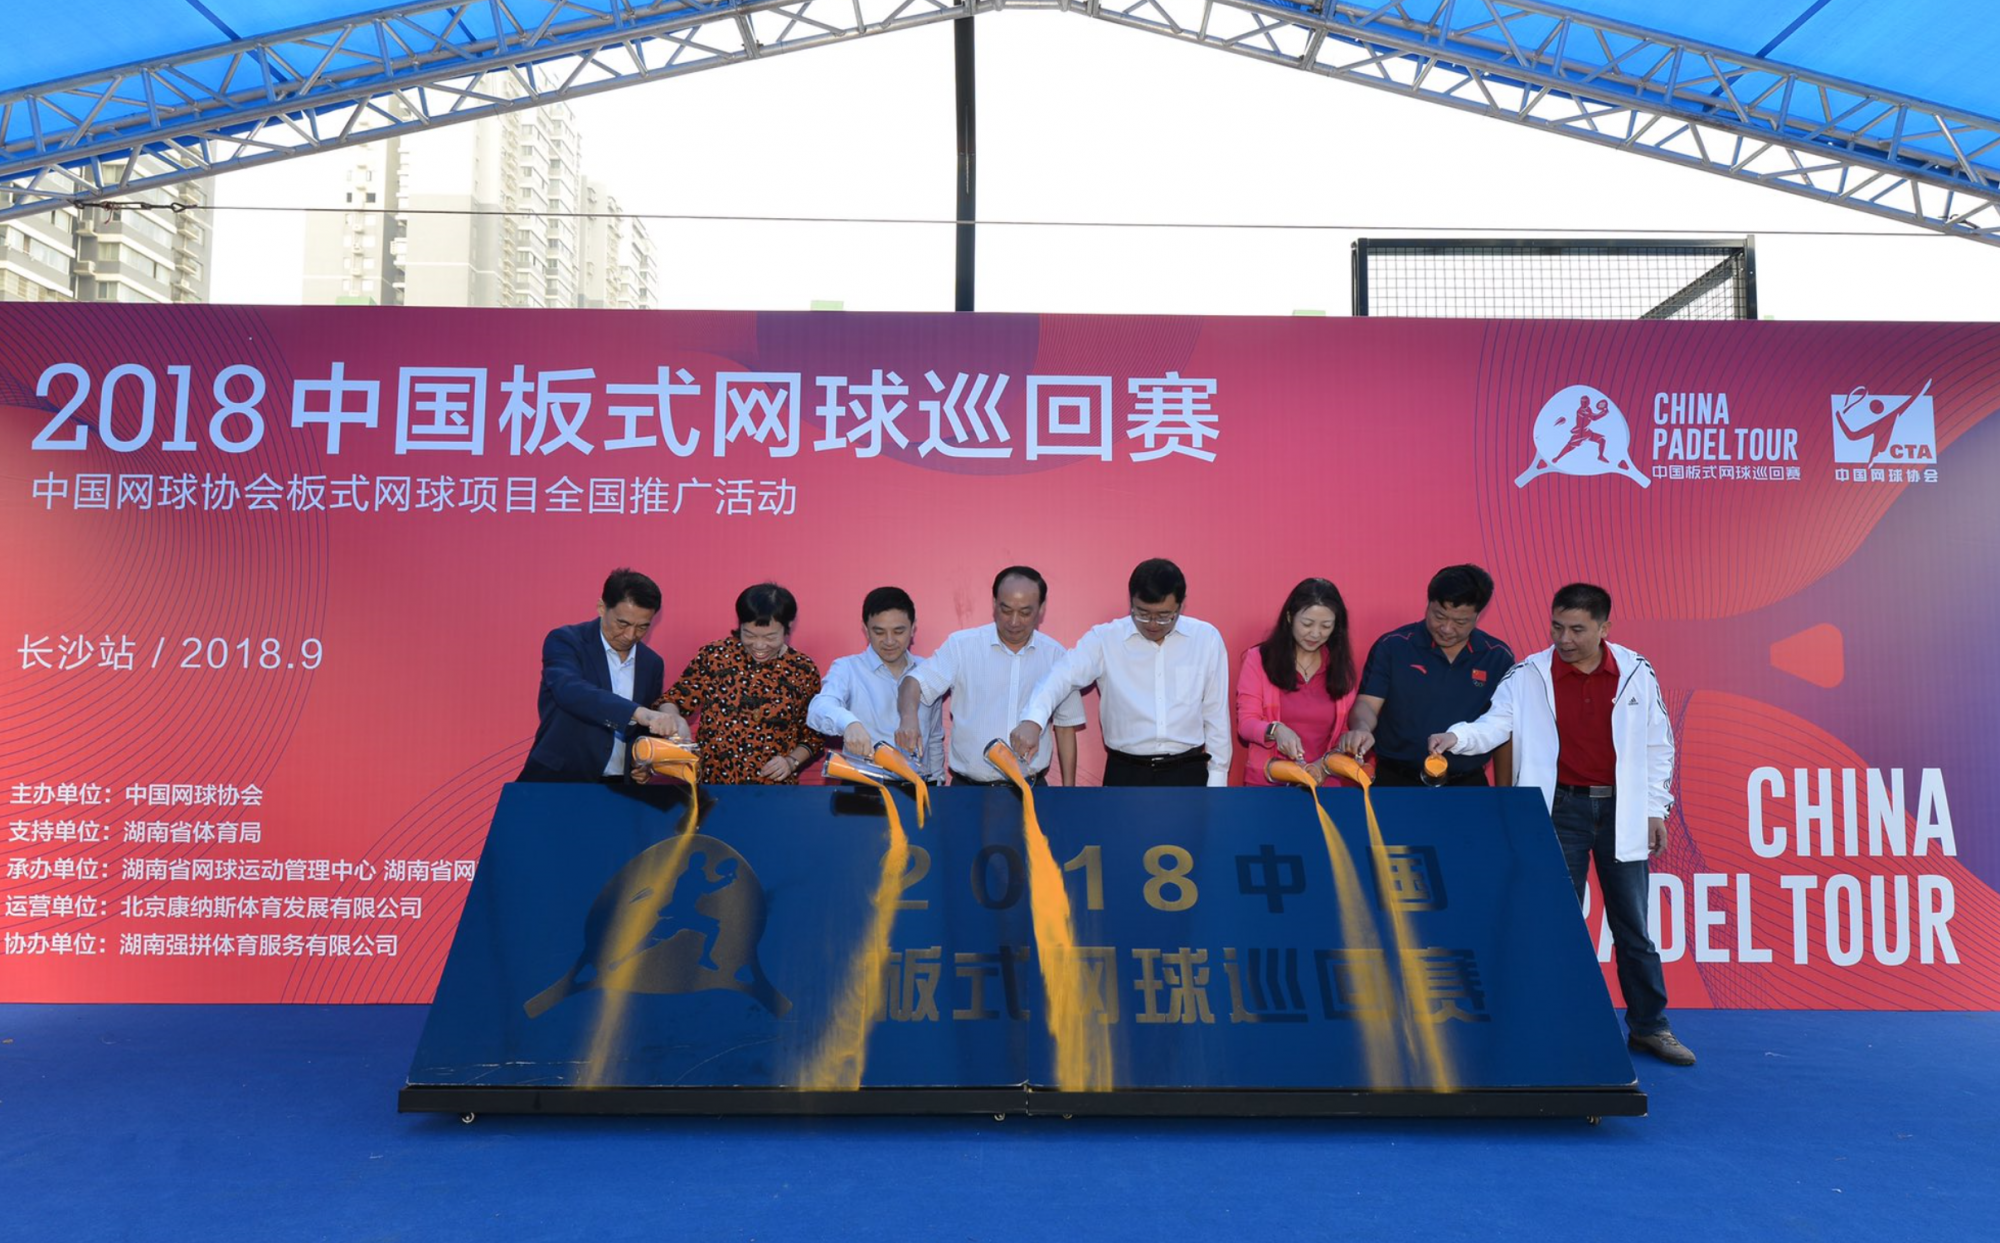 China could become a major player in padel global